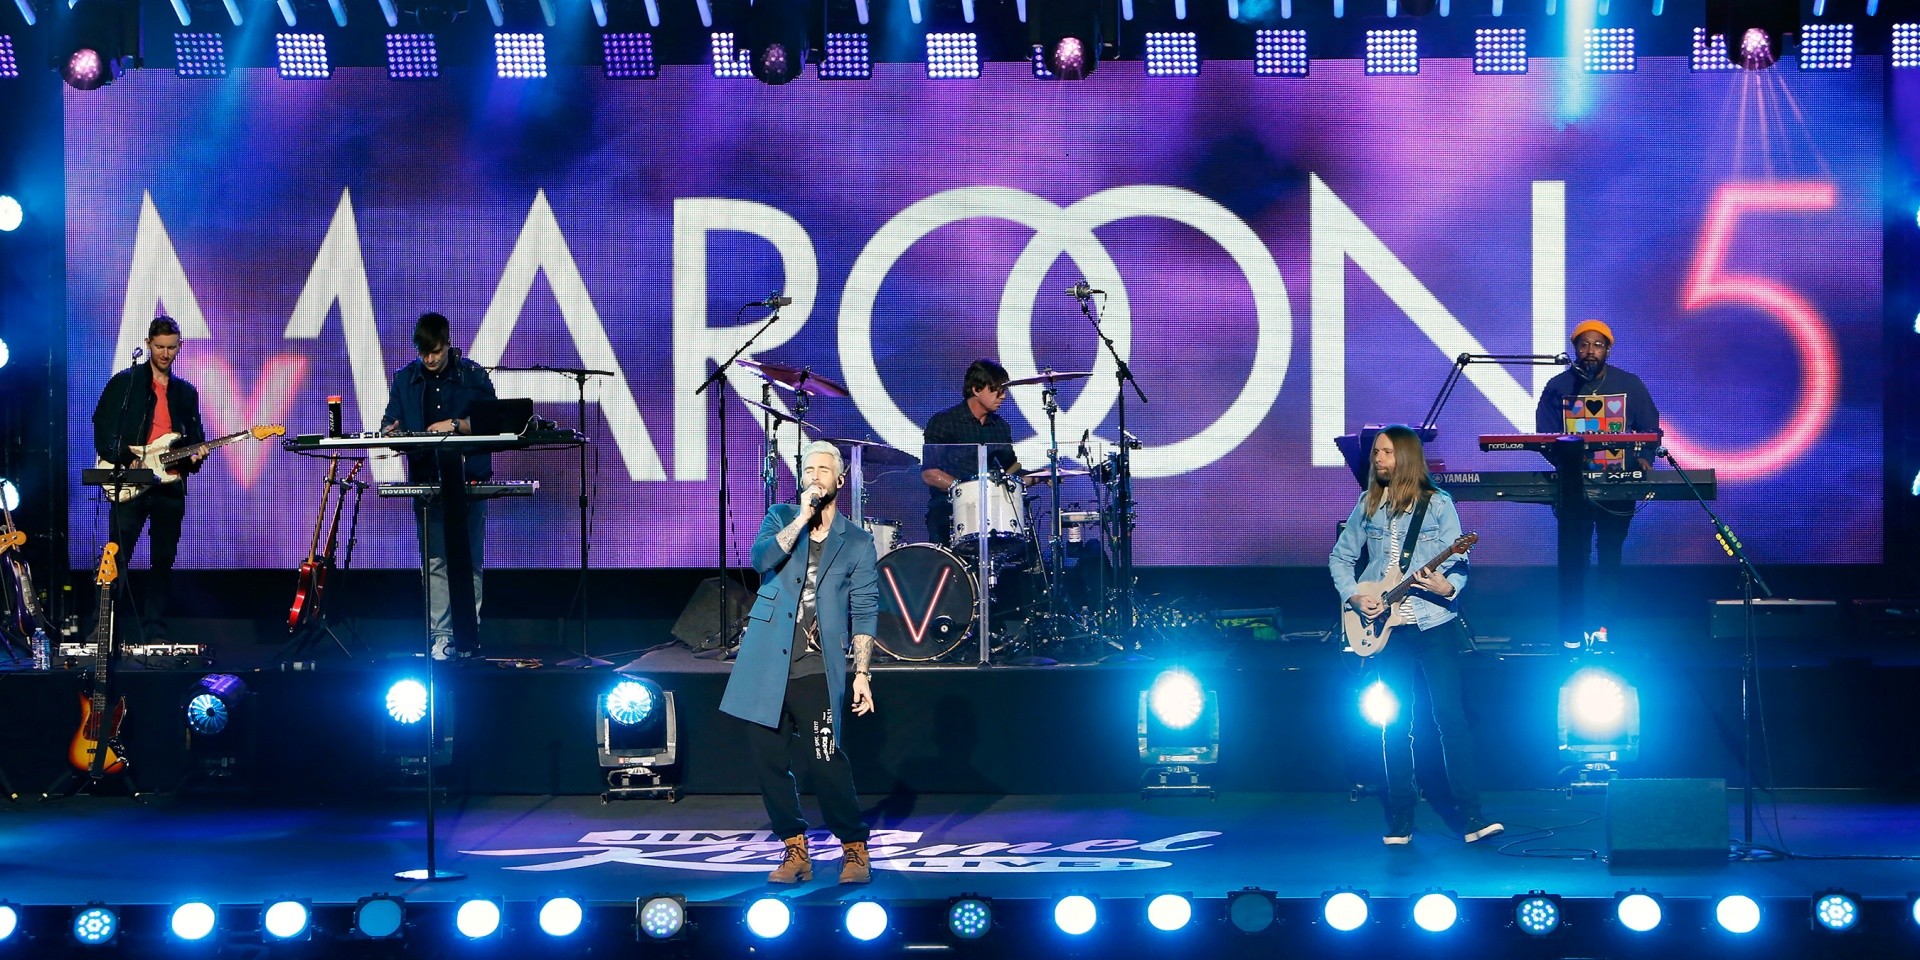 Maroon 5 returns with a nostalgic new single ‘Memories’